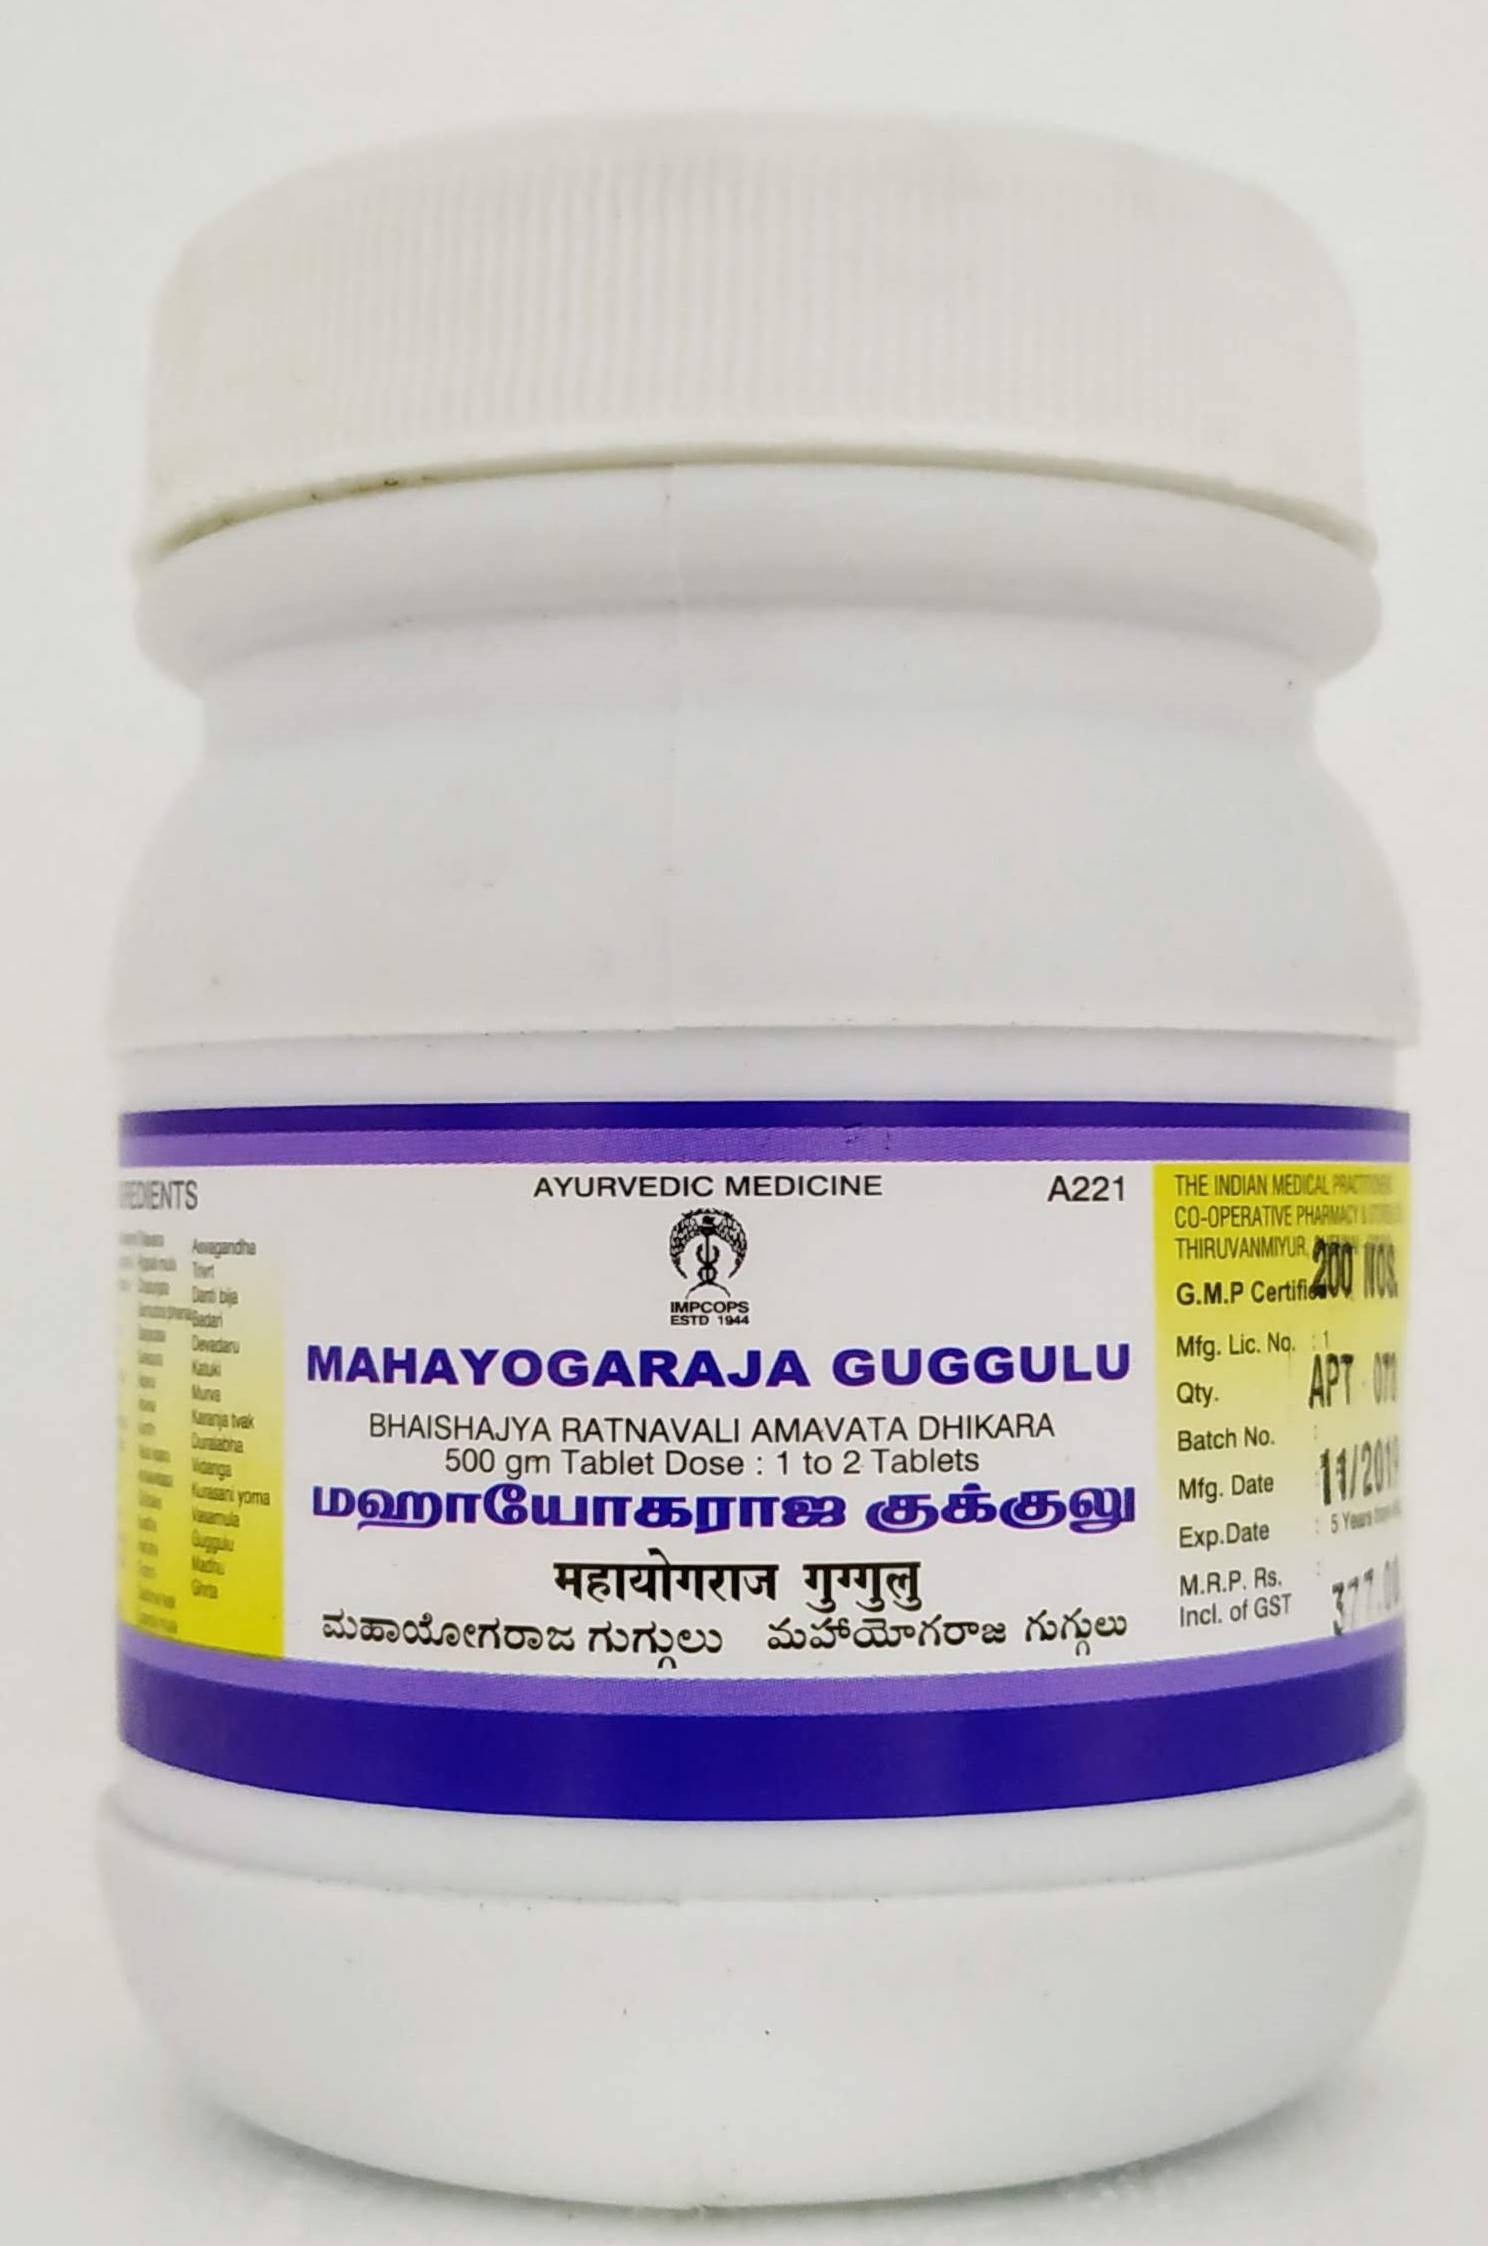 Shop Mahayogaraja guggulu Tablets - 200Tablets at price 528.00 from Impcops Online - Ayush Care